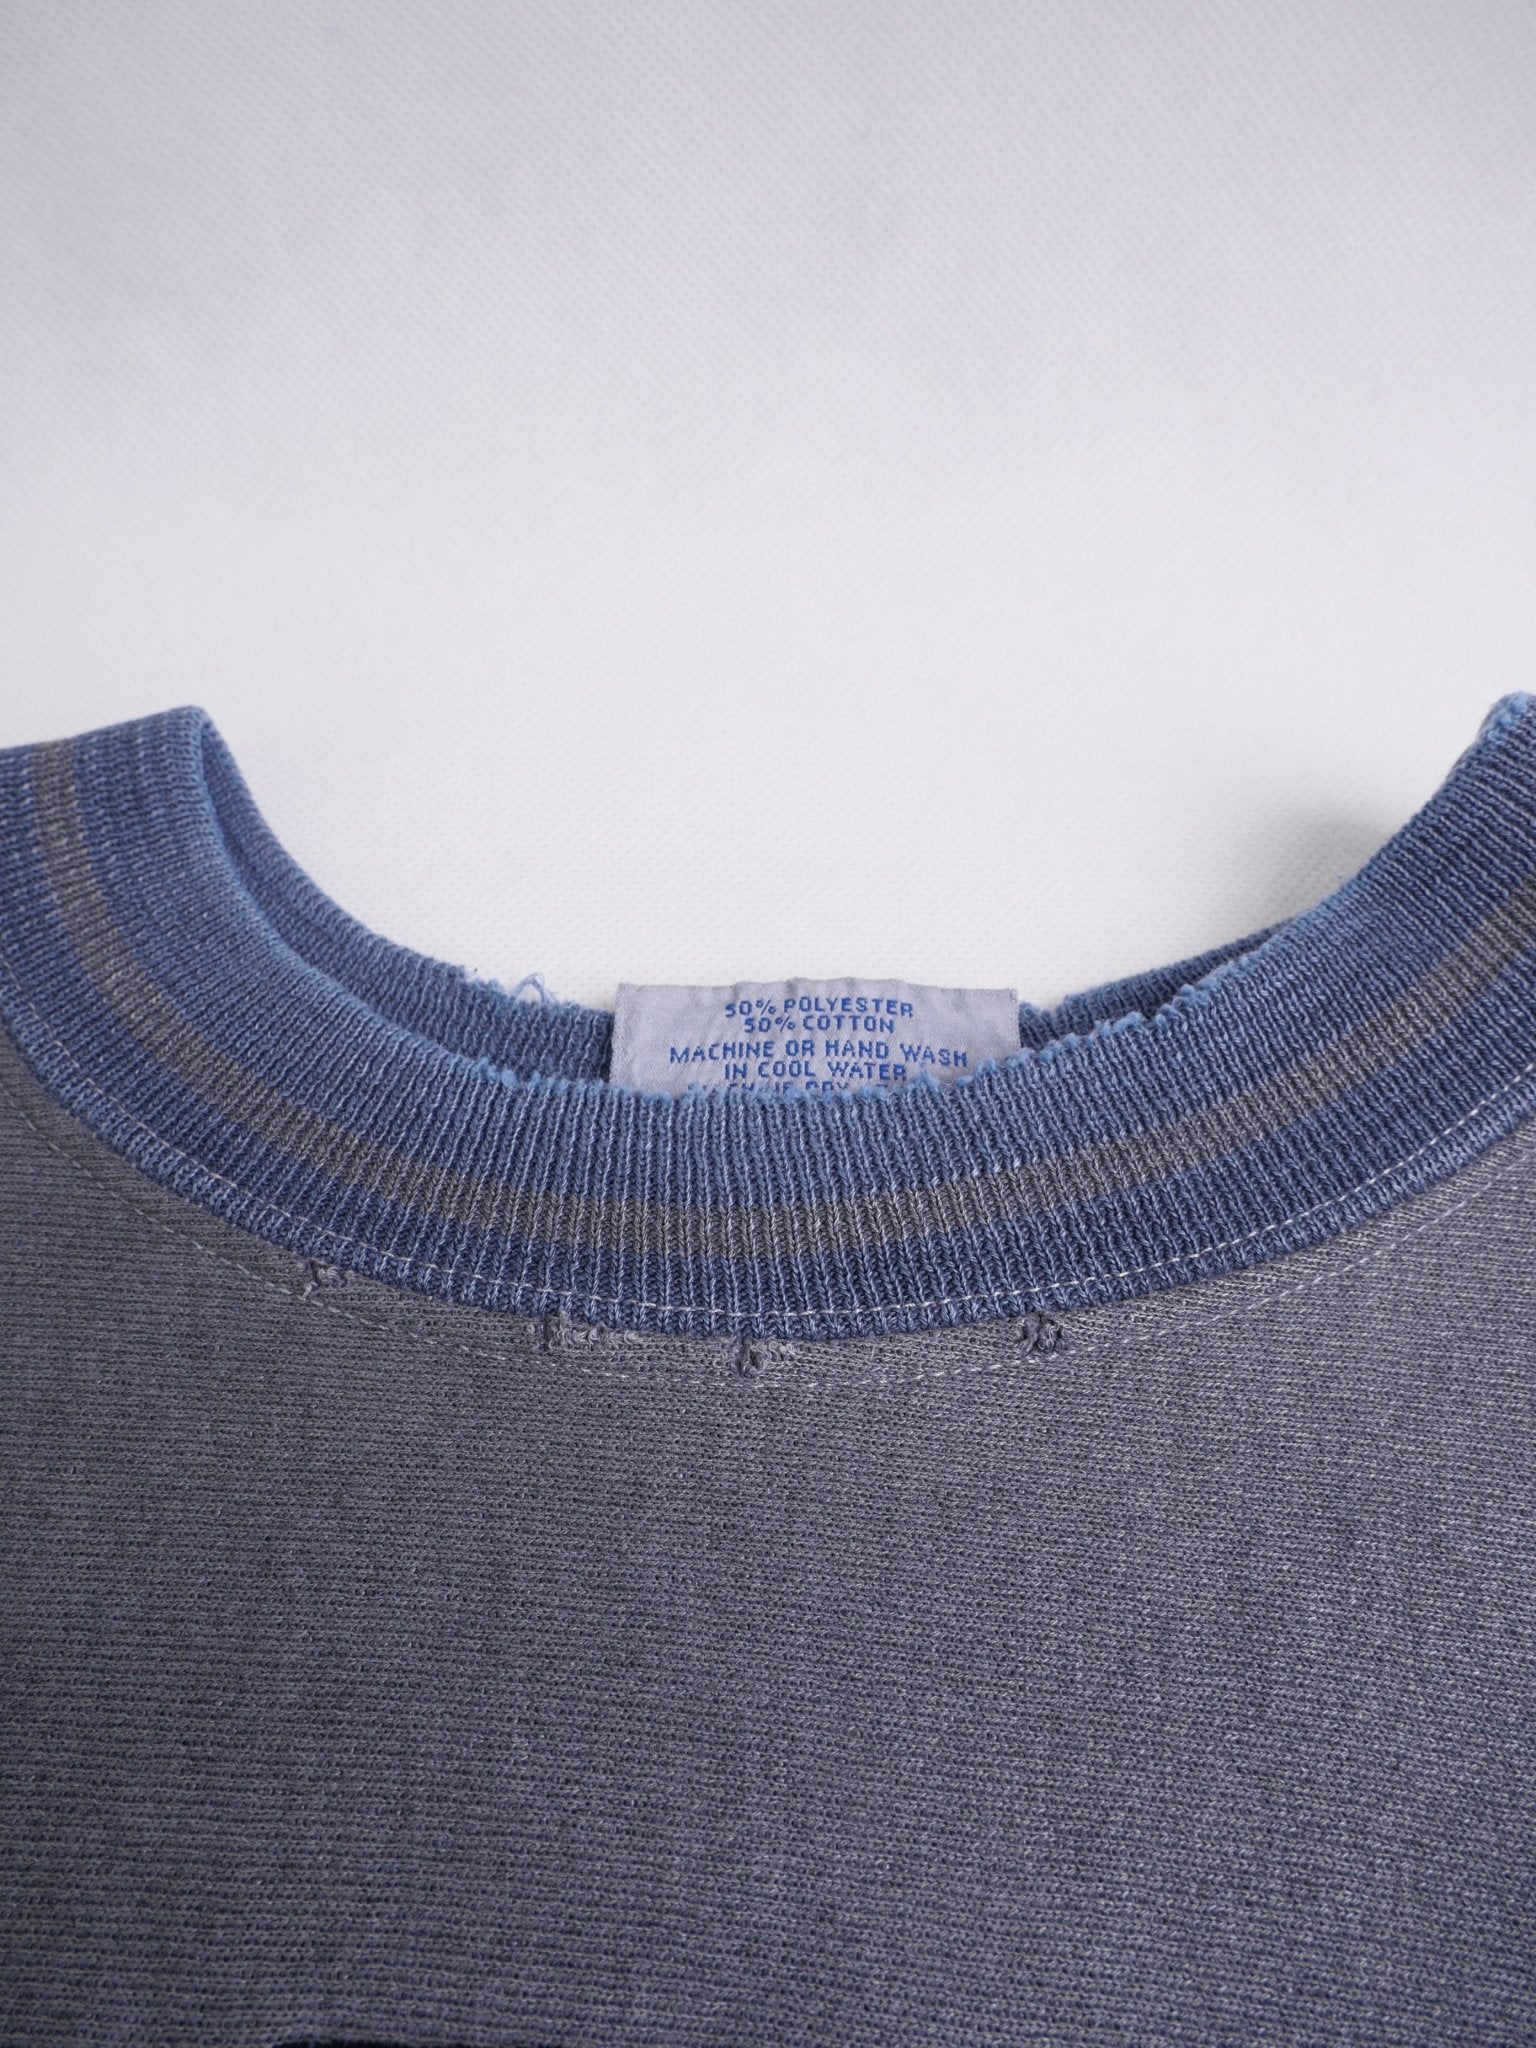 UNC Tar Heels embroidered Spellout grey Sweater - Peeces